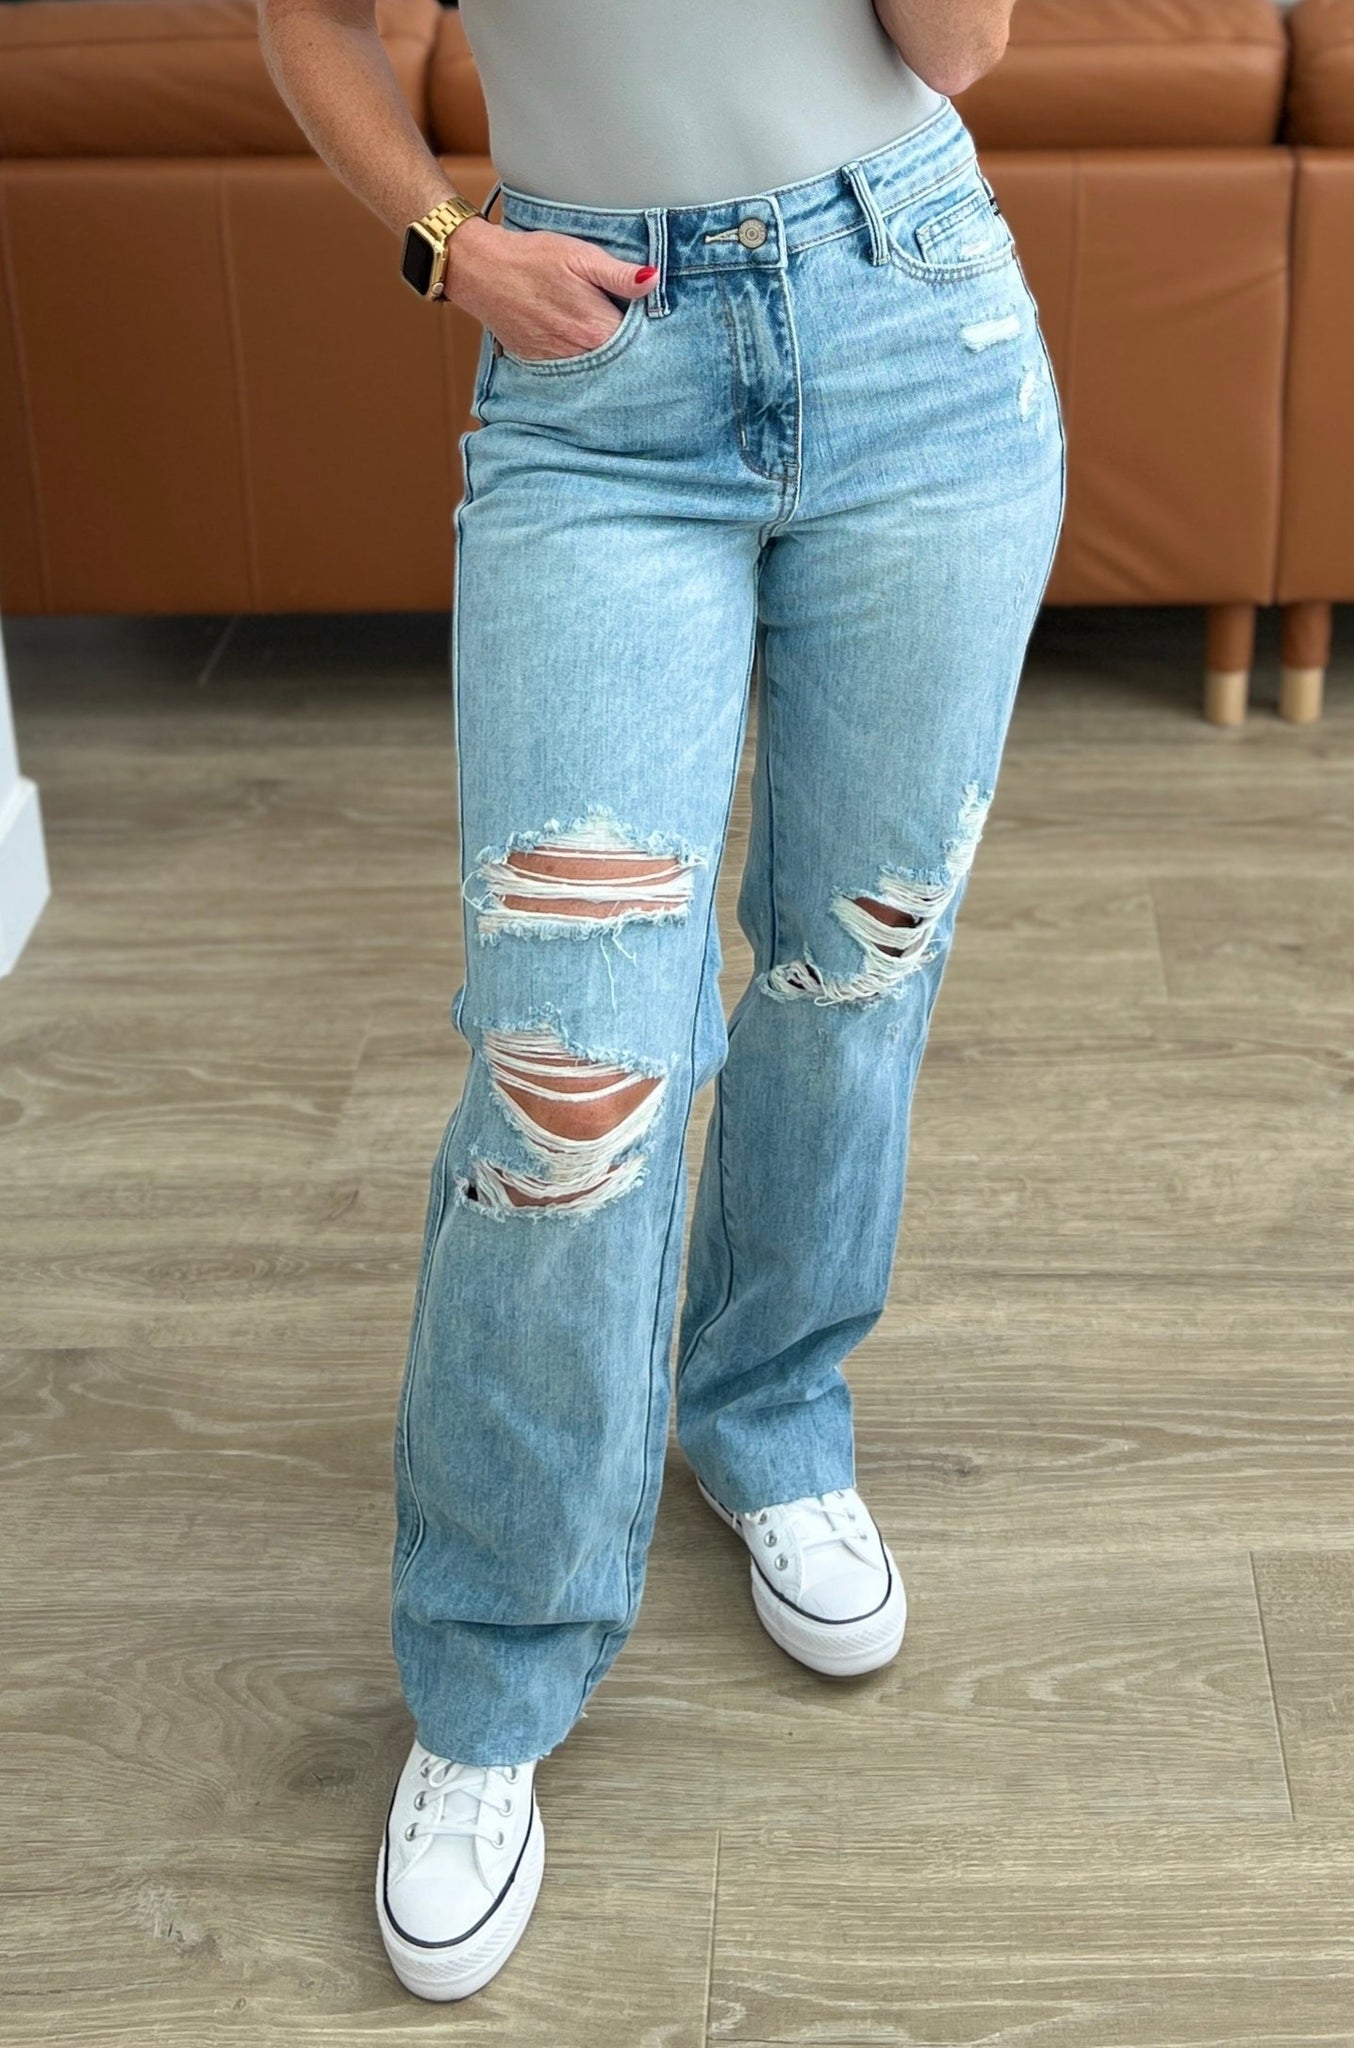 Is The Viral 'Jeans Boots' Trend Worth Trying? - HELLO! India